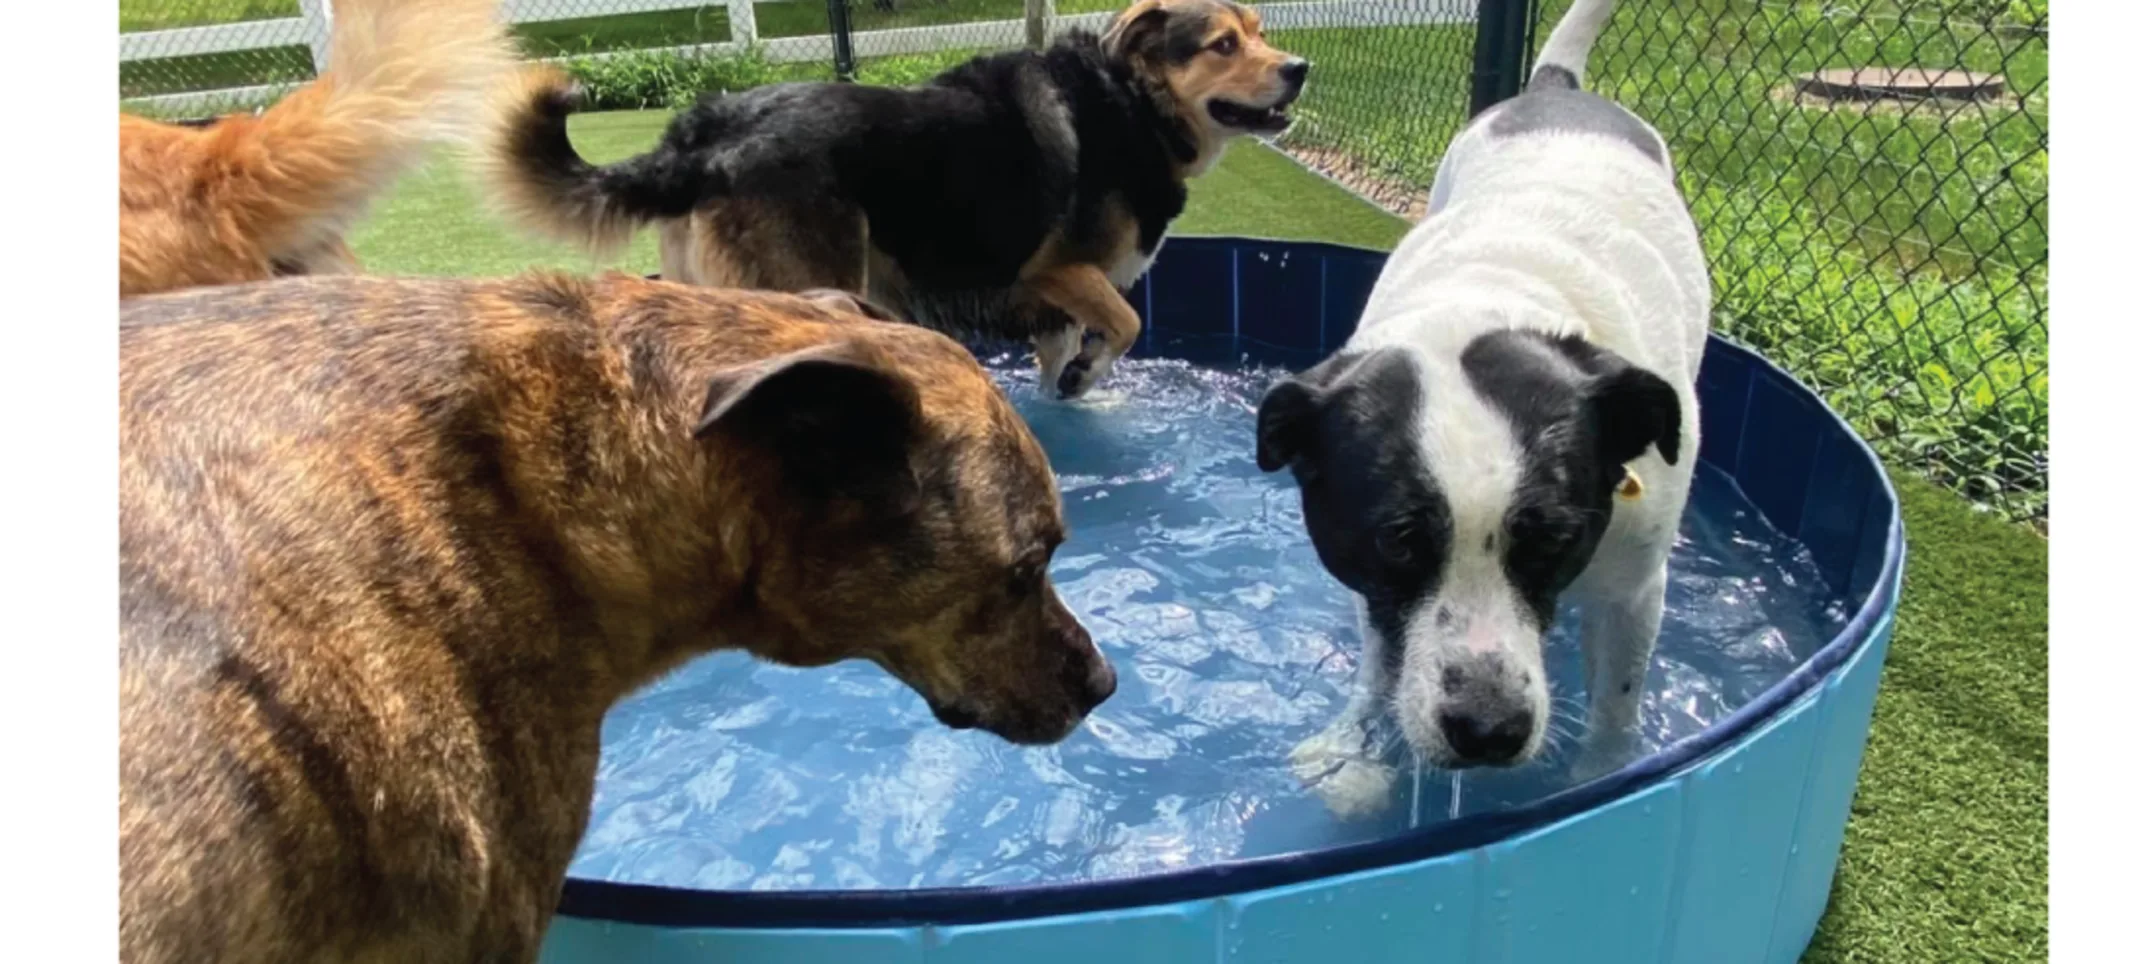 Dogs in pool at daycare